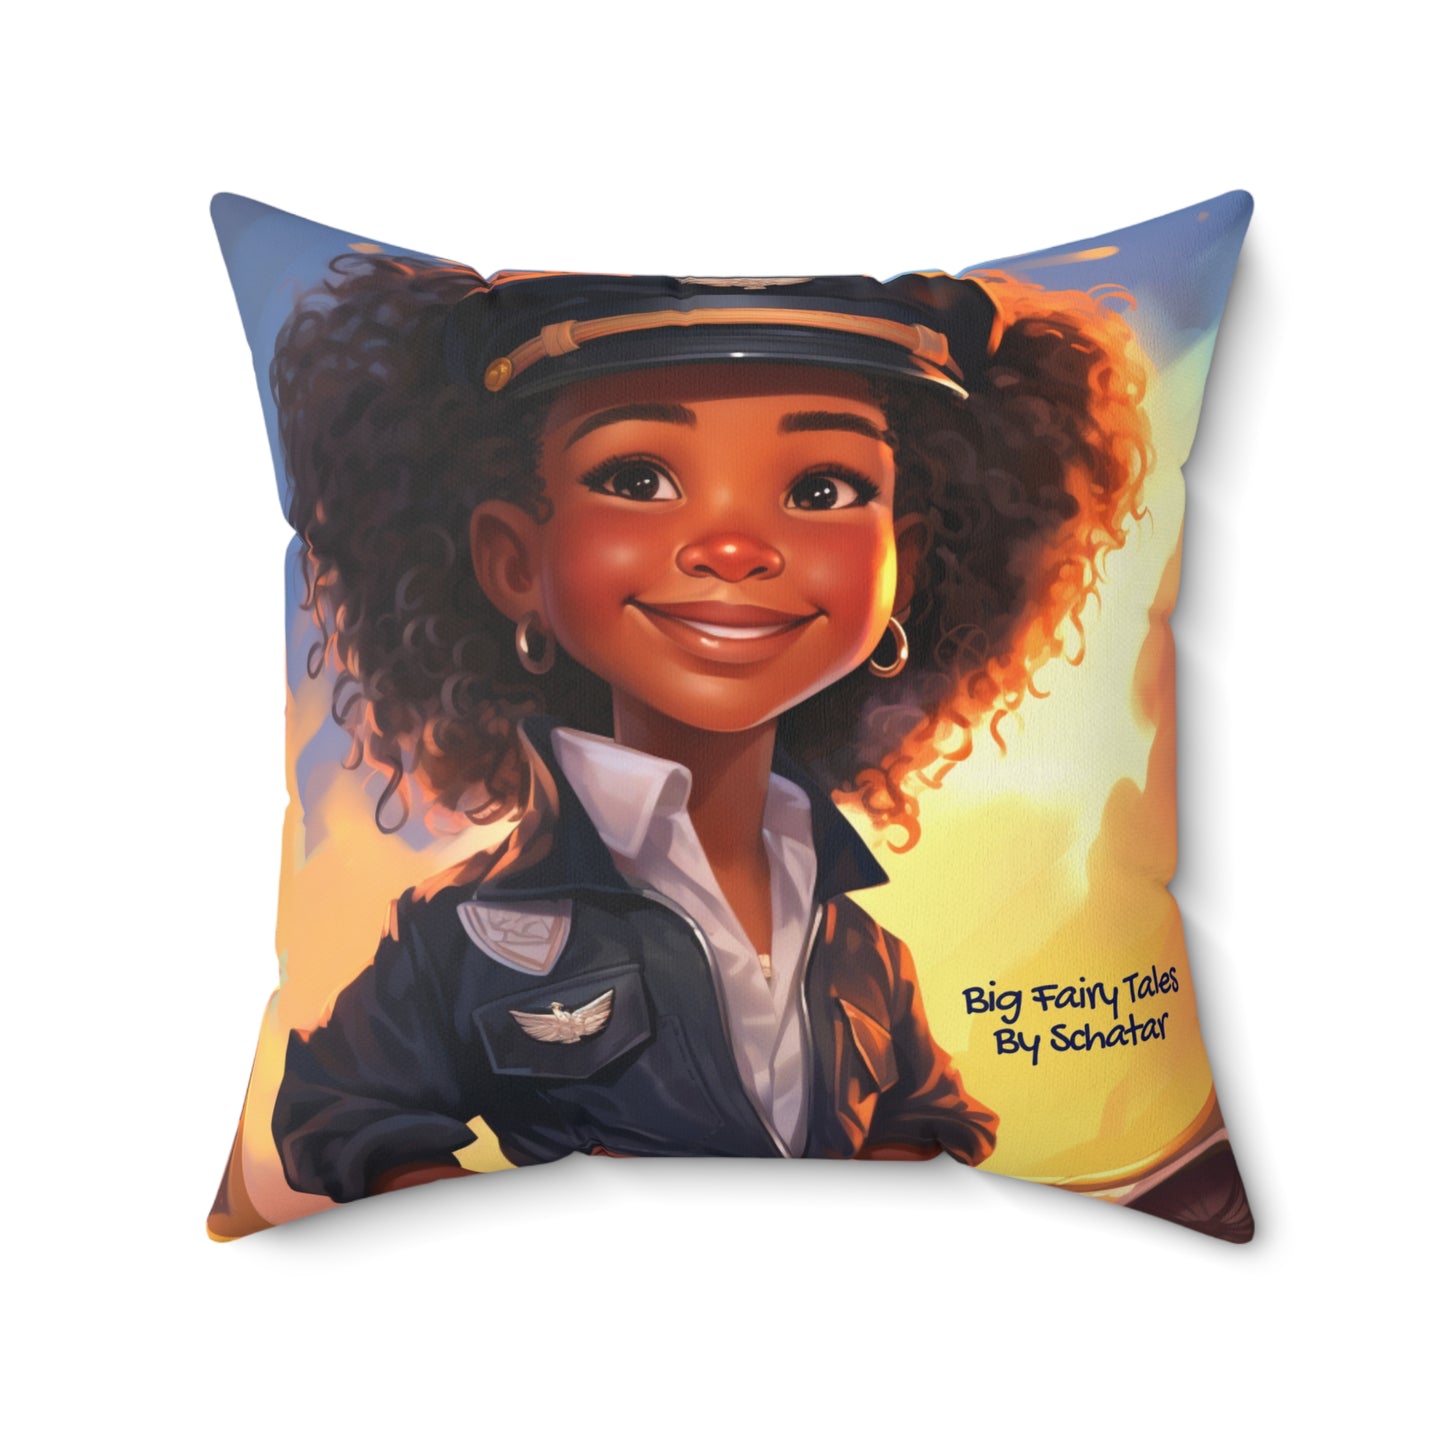 Pilot - Big Little Professionals Plush Pillow 5 From Big Fairy Tales By Schatar